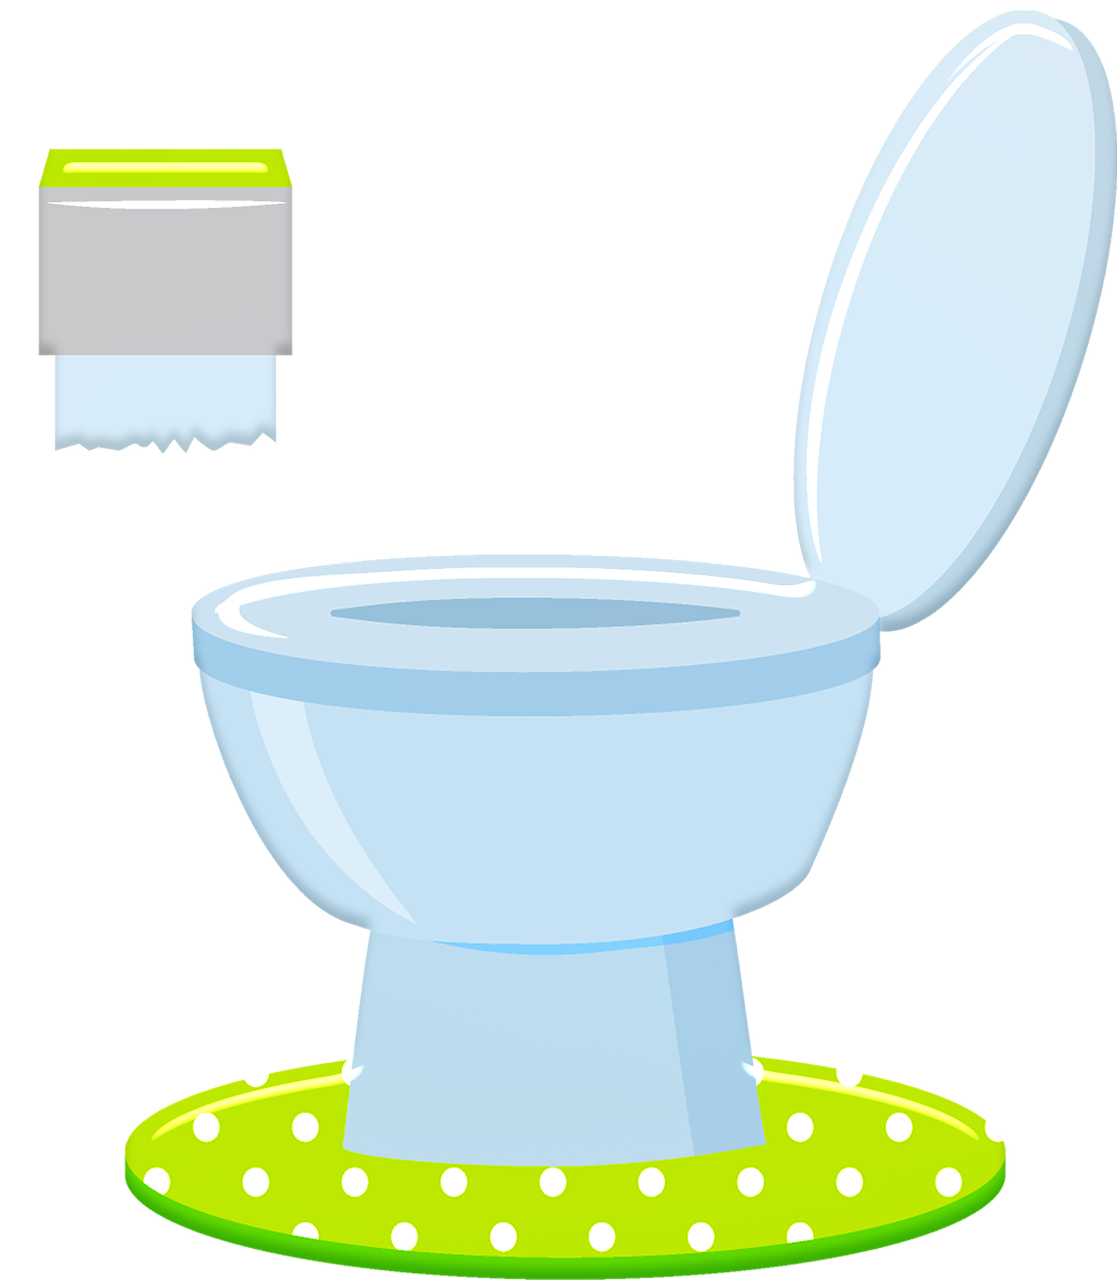 a toilet with a toilet paper dispenser next to it, inspired by Masamitsu Ōta, pixabay, conceptual art, floating. greenish blue, polka dot, on a flat color black background, sticker illustration